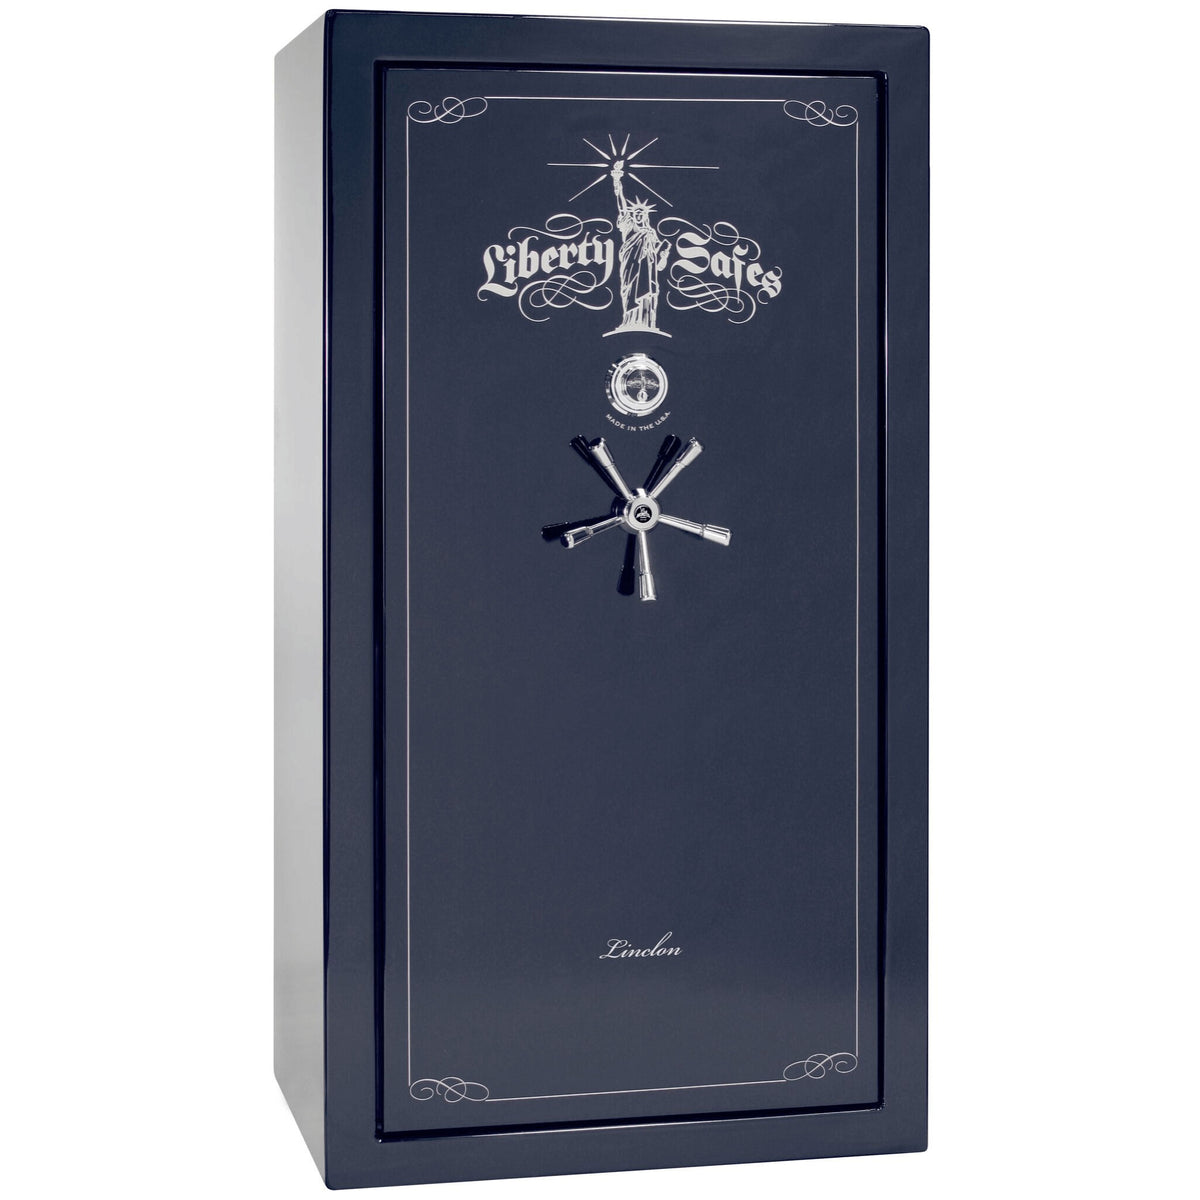 Liberty Lincoln 40 Safe in Blue Gloss with Chrome Mechanical Lock.